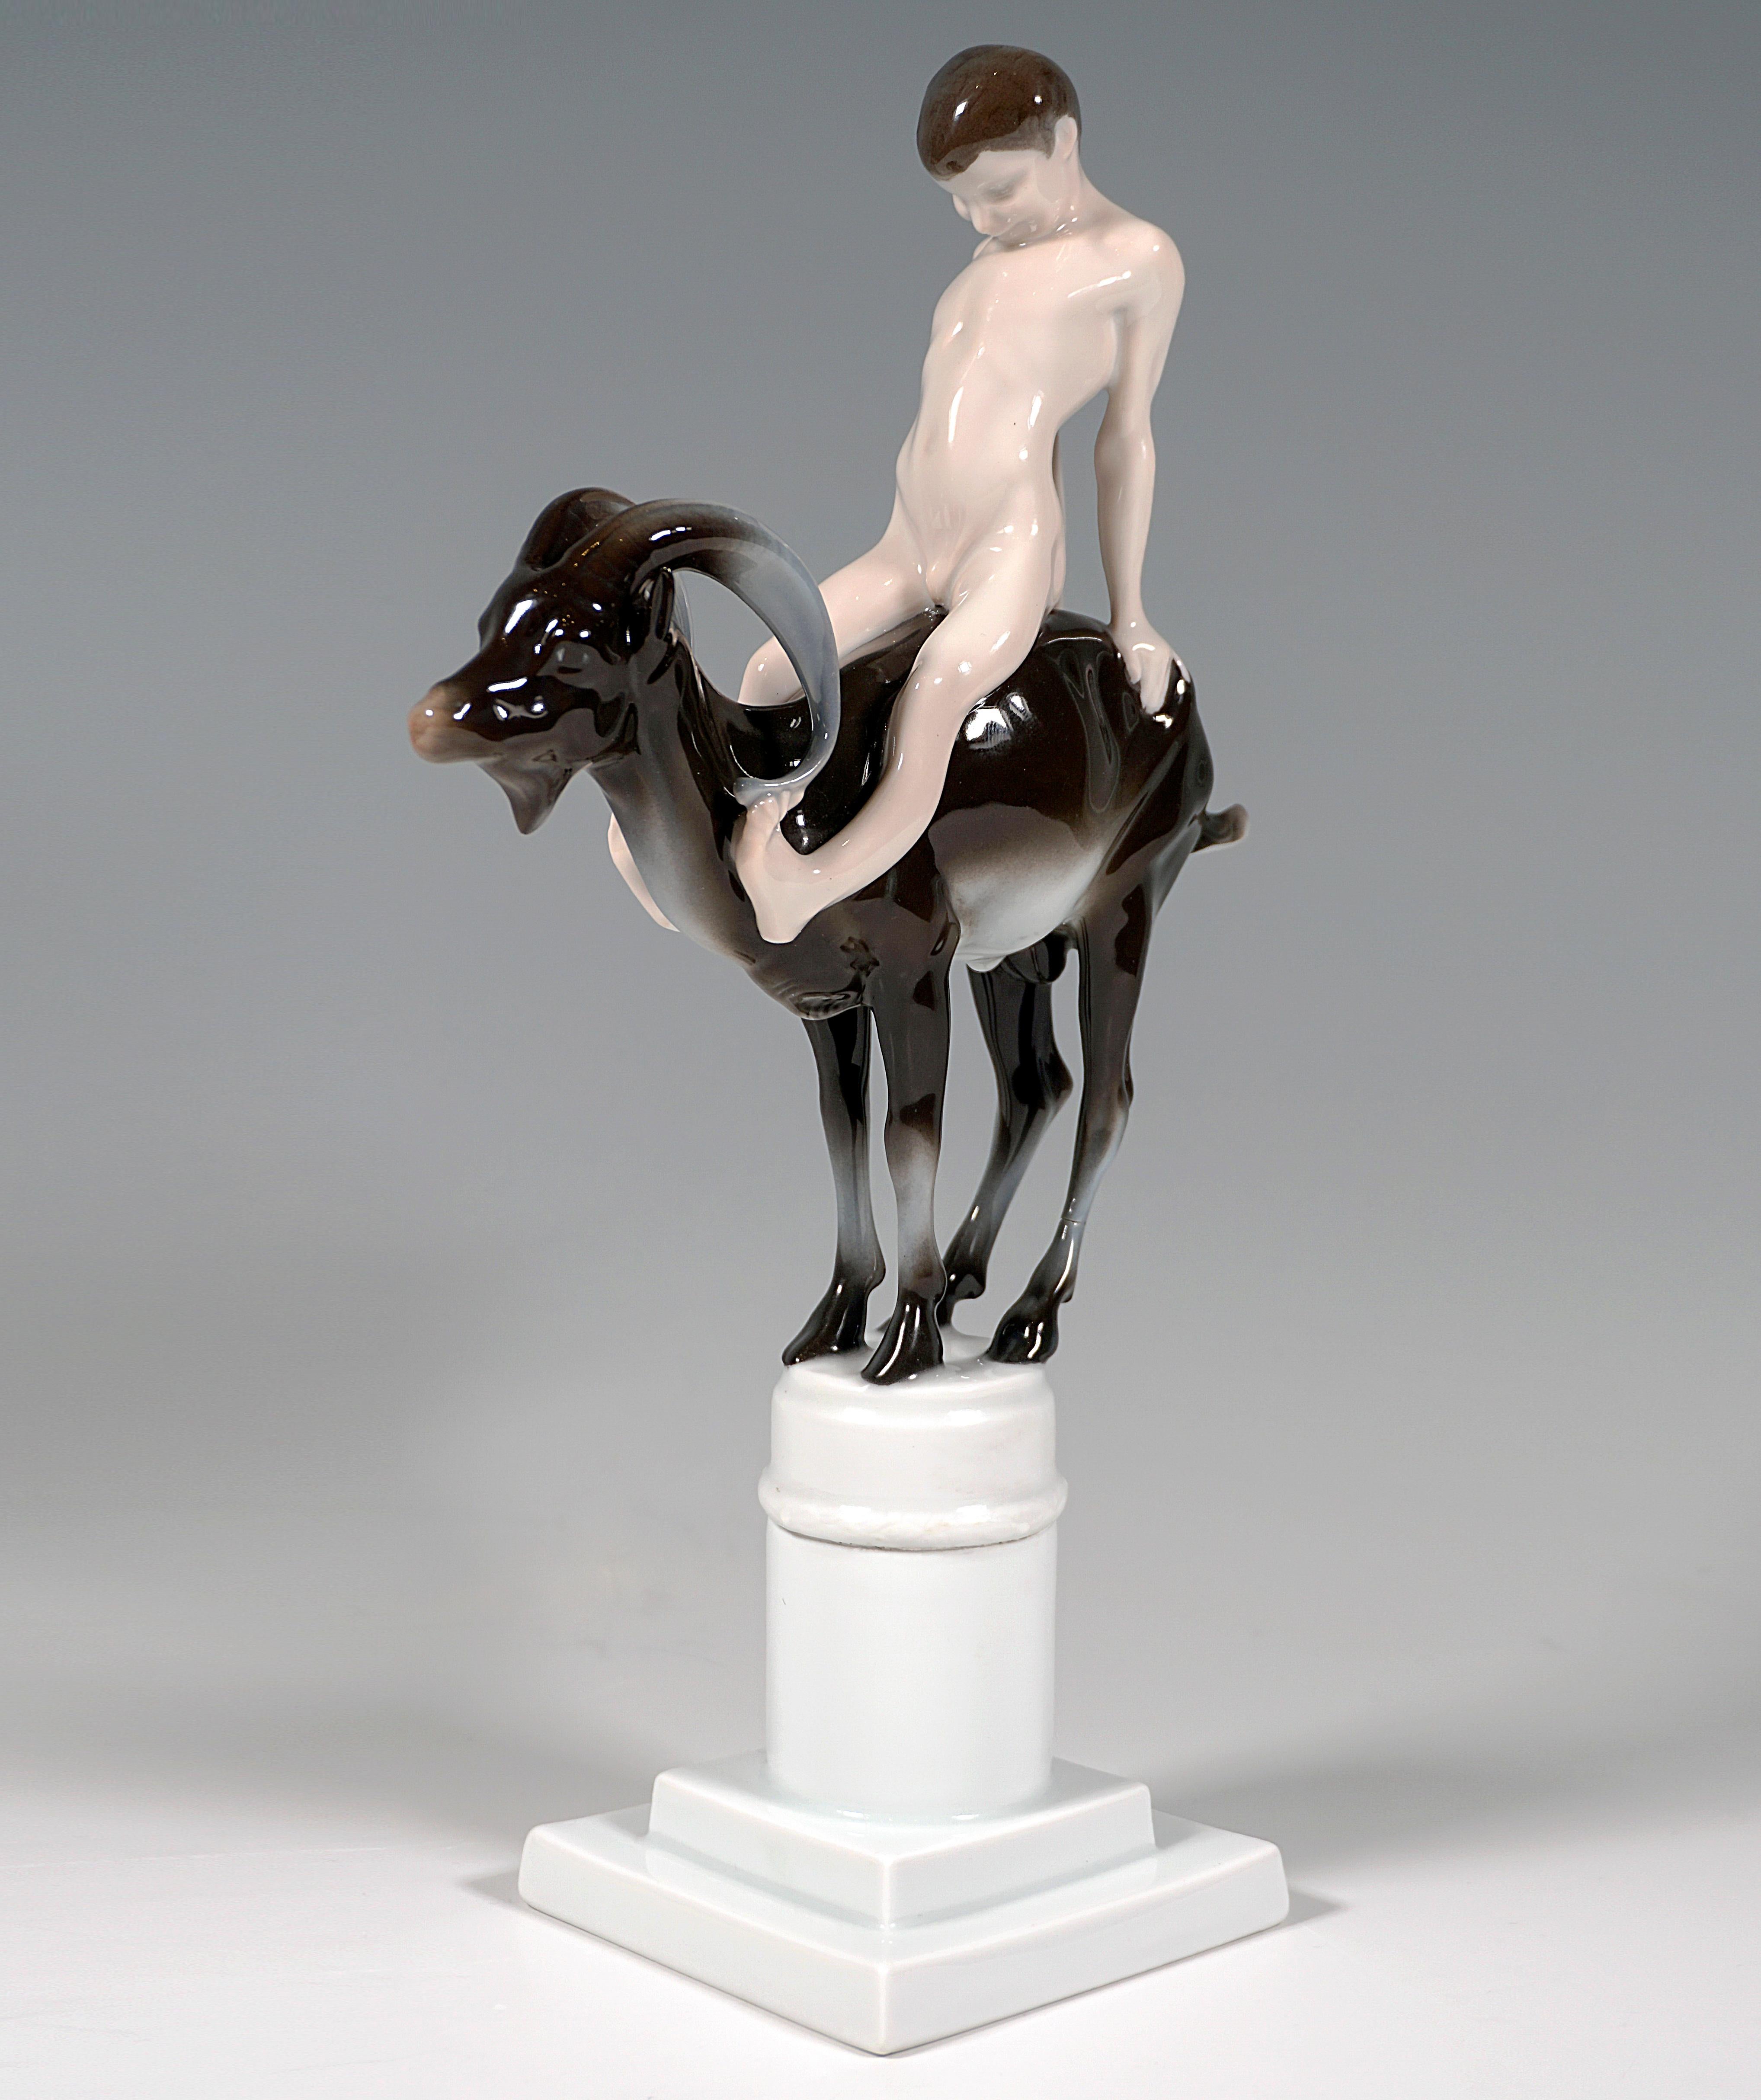 Admirable Art Nouveau Figure Group by Rosenthal.
Naked faun-like boy sitting on the back of an ibex, straining his upper body backwards and supporting himself with both arms on the hindquarters of the animal.
The group of figures is based on a